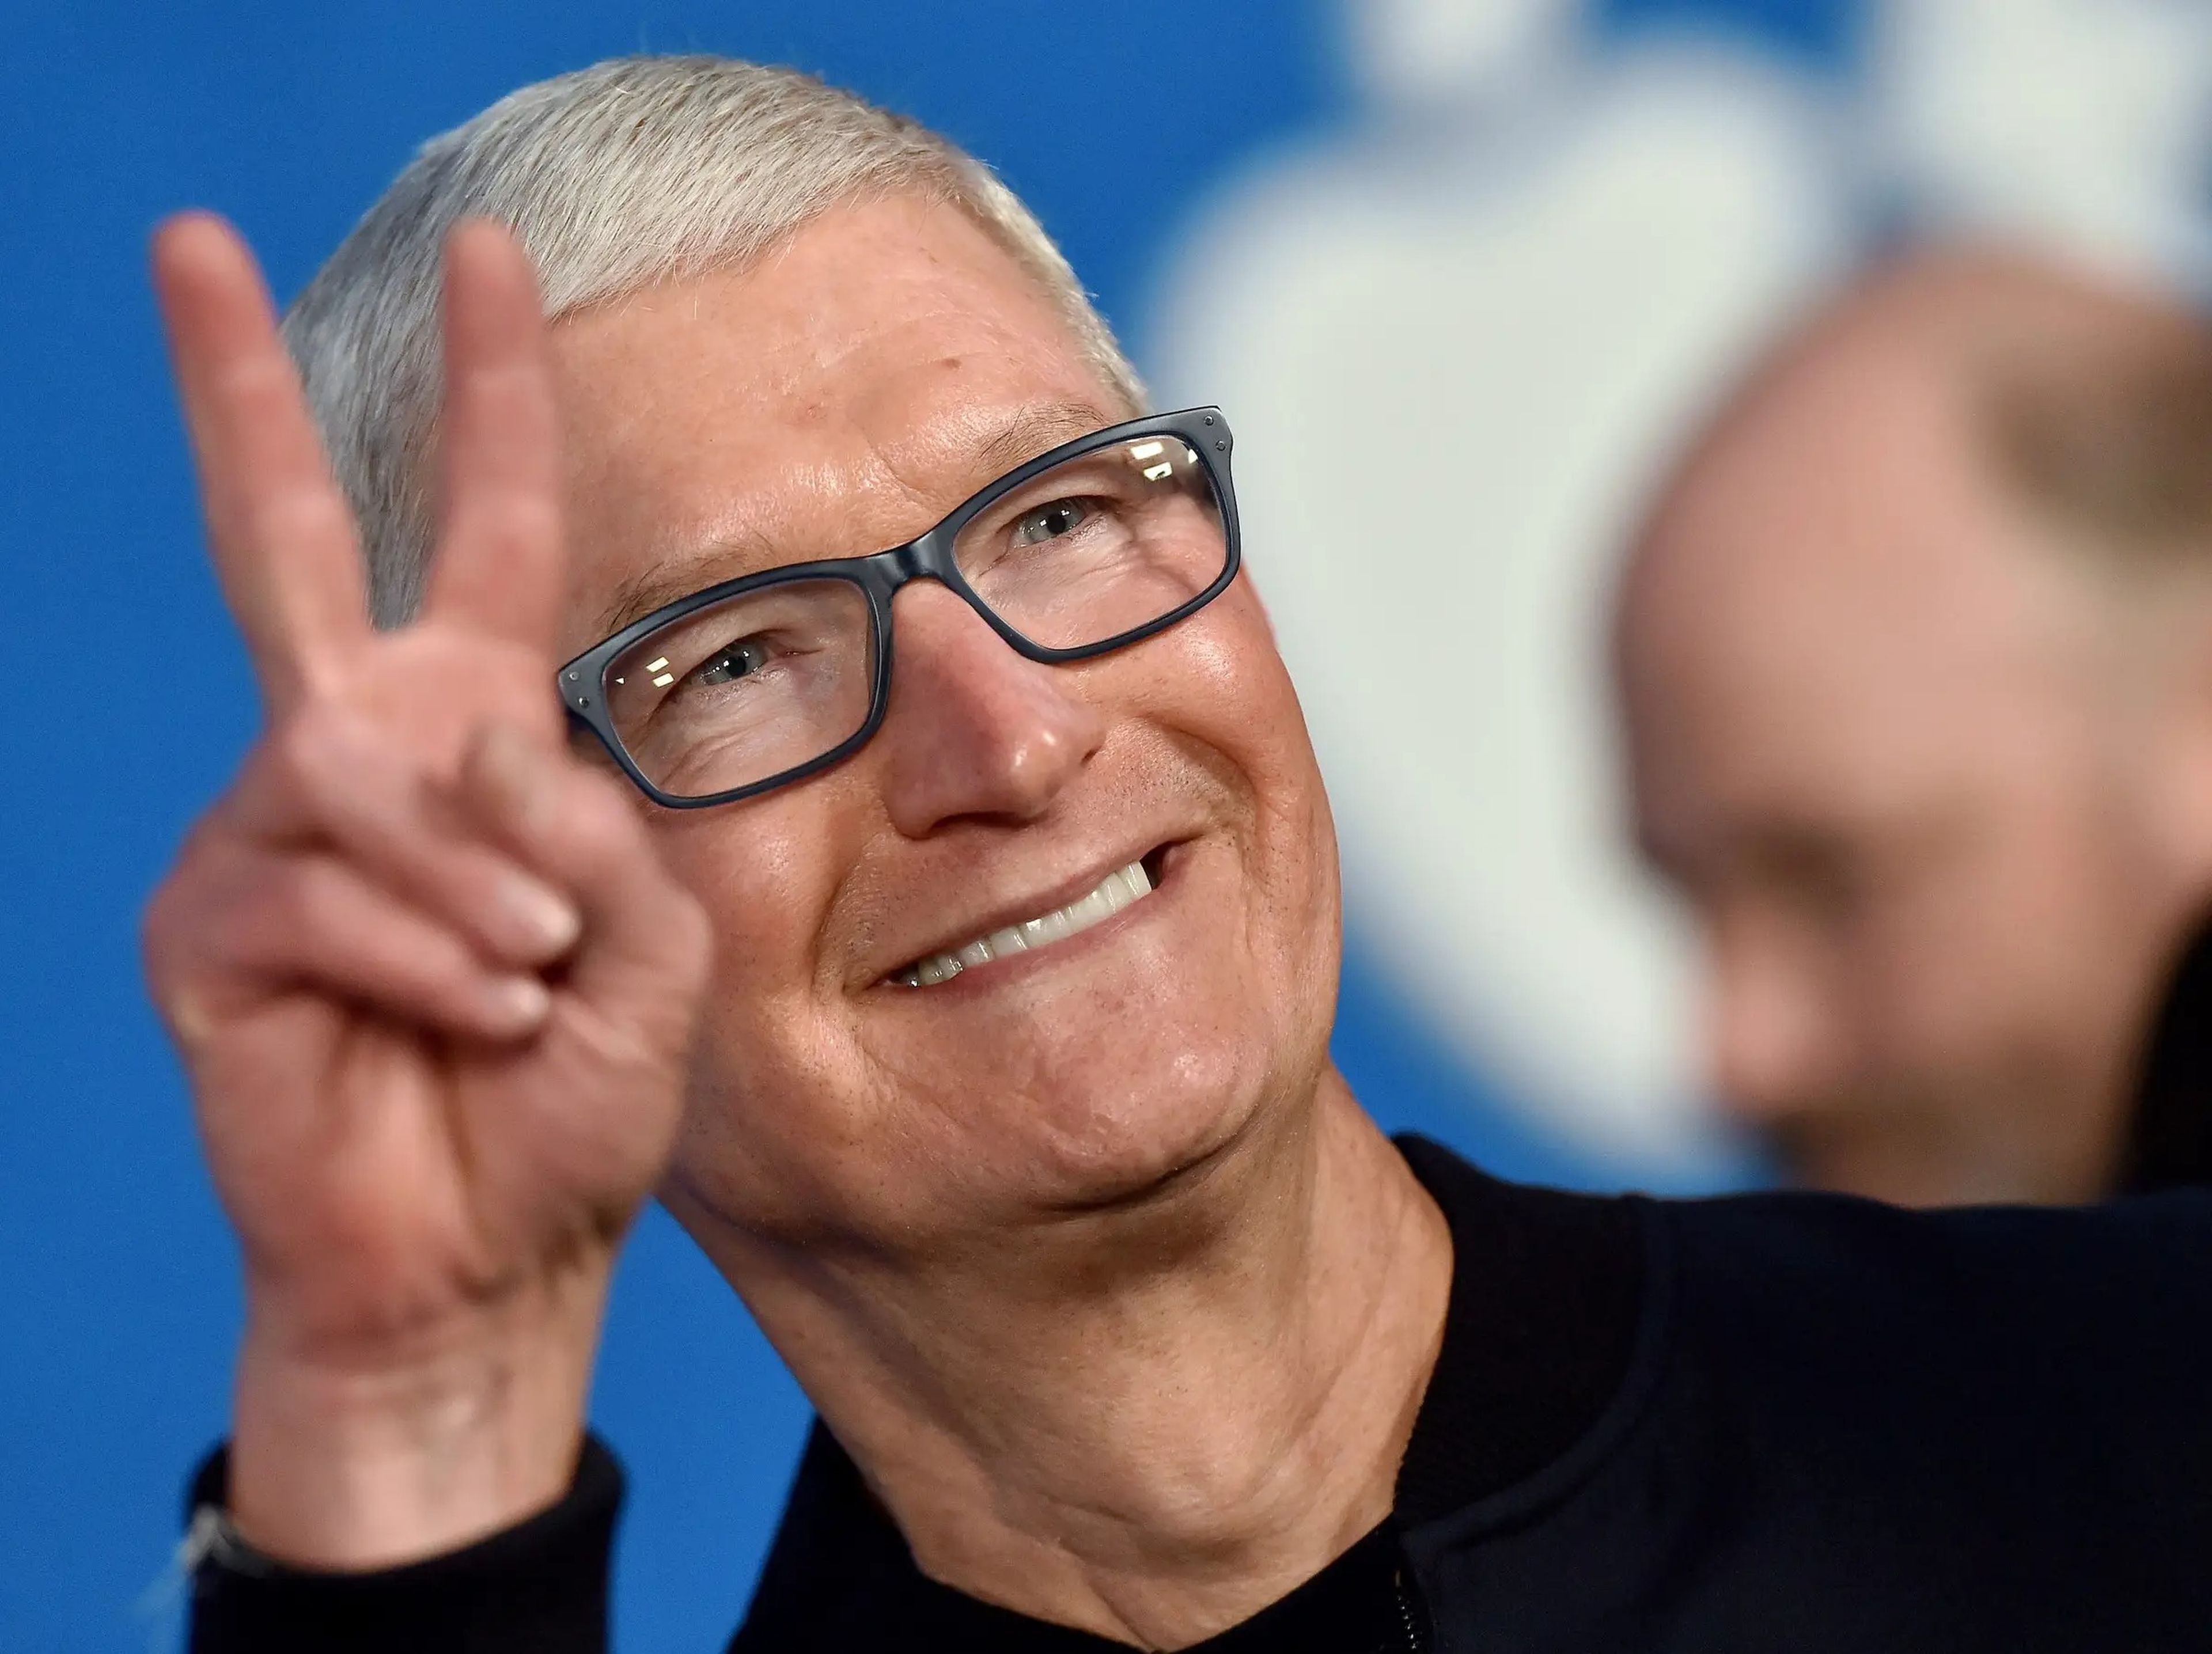 Apple CEO Tim Cook attends Apple's "Ted Lasso" Season 2 Premiere at Pacific Design Center on July 15, 2021 in West Hollywood, California.